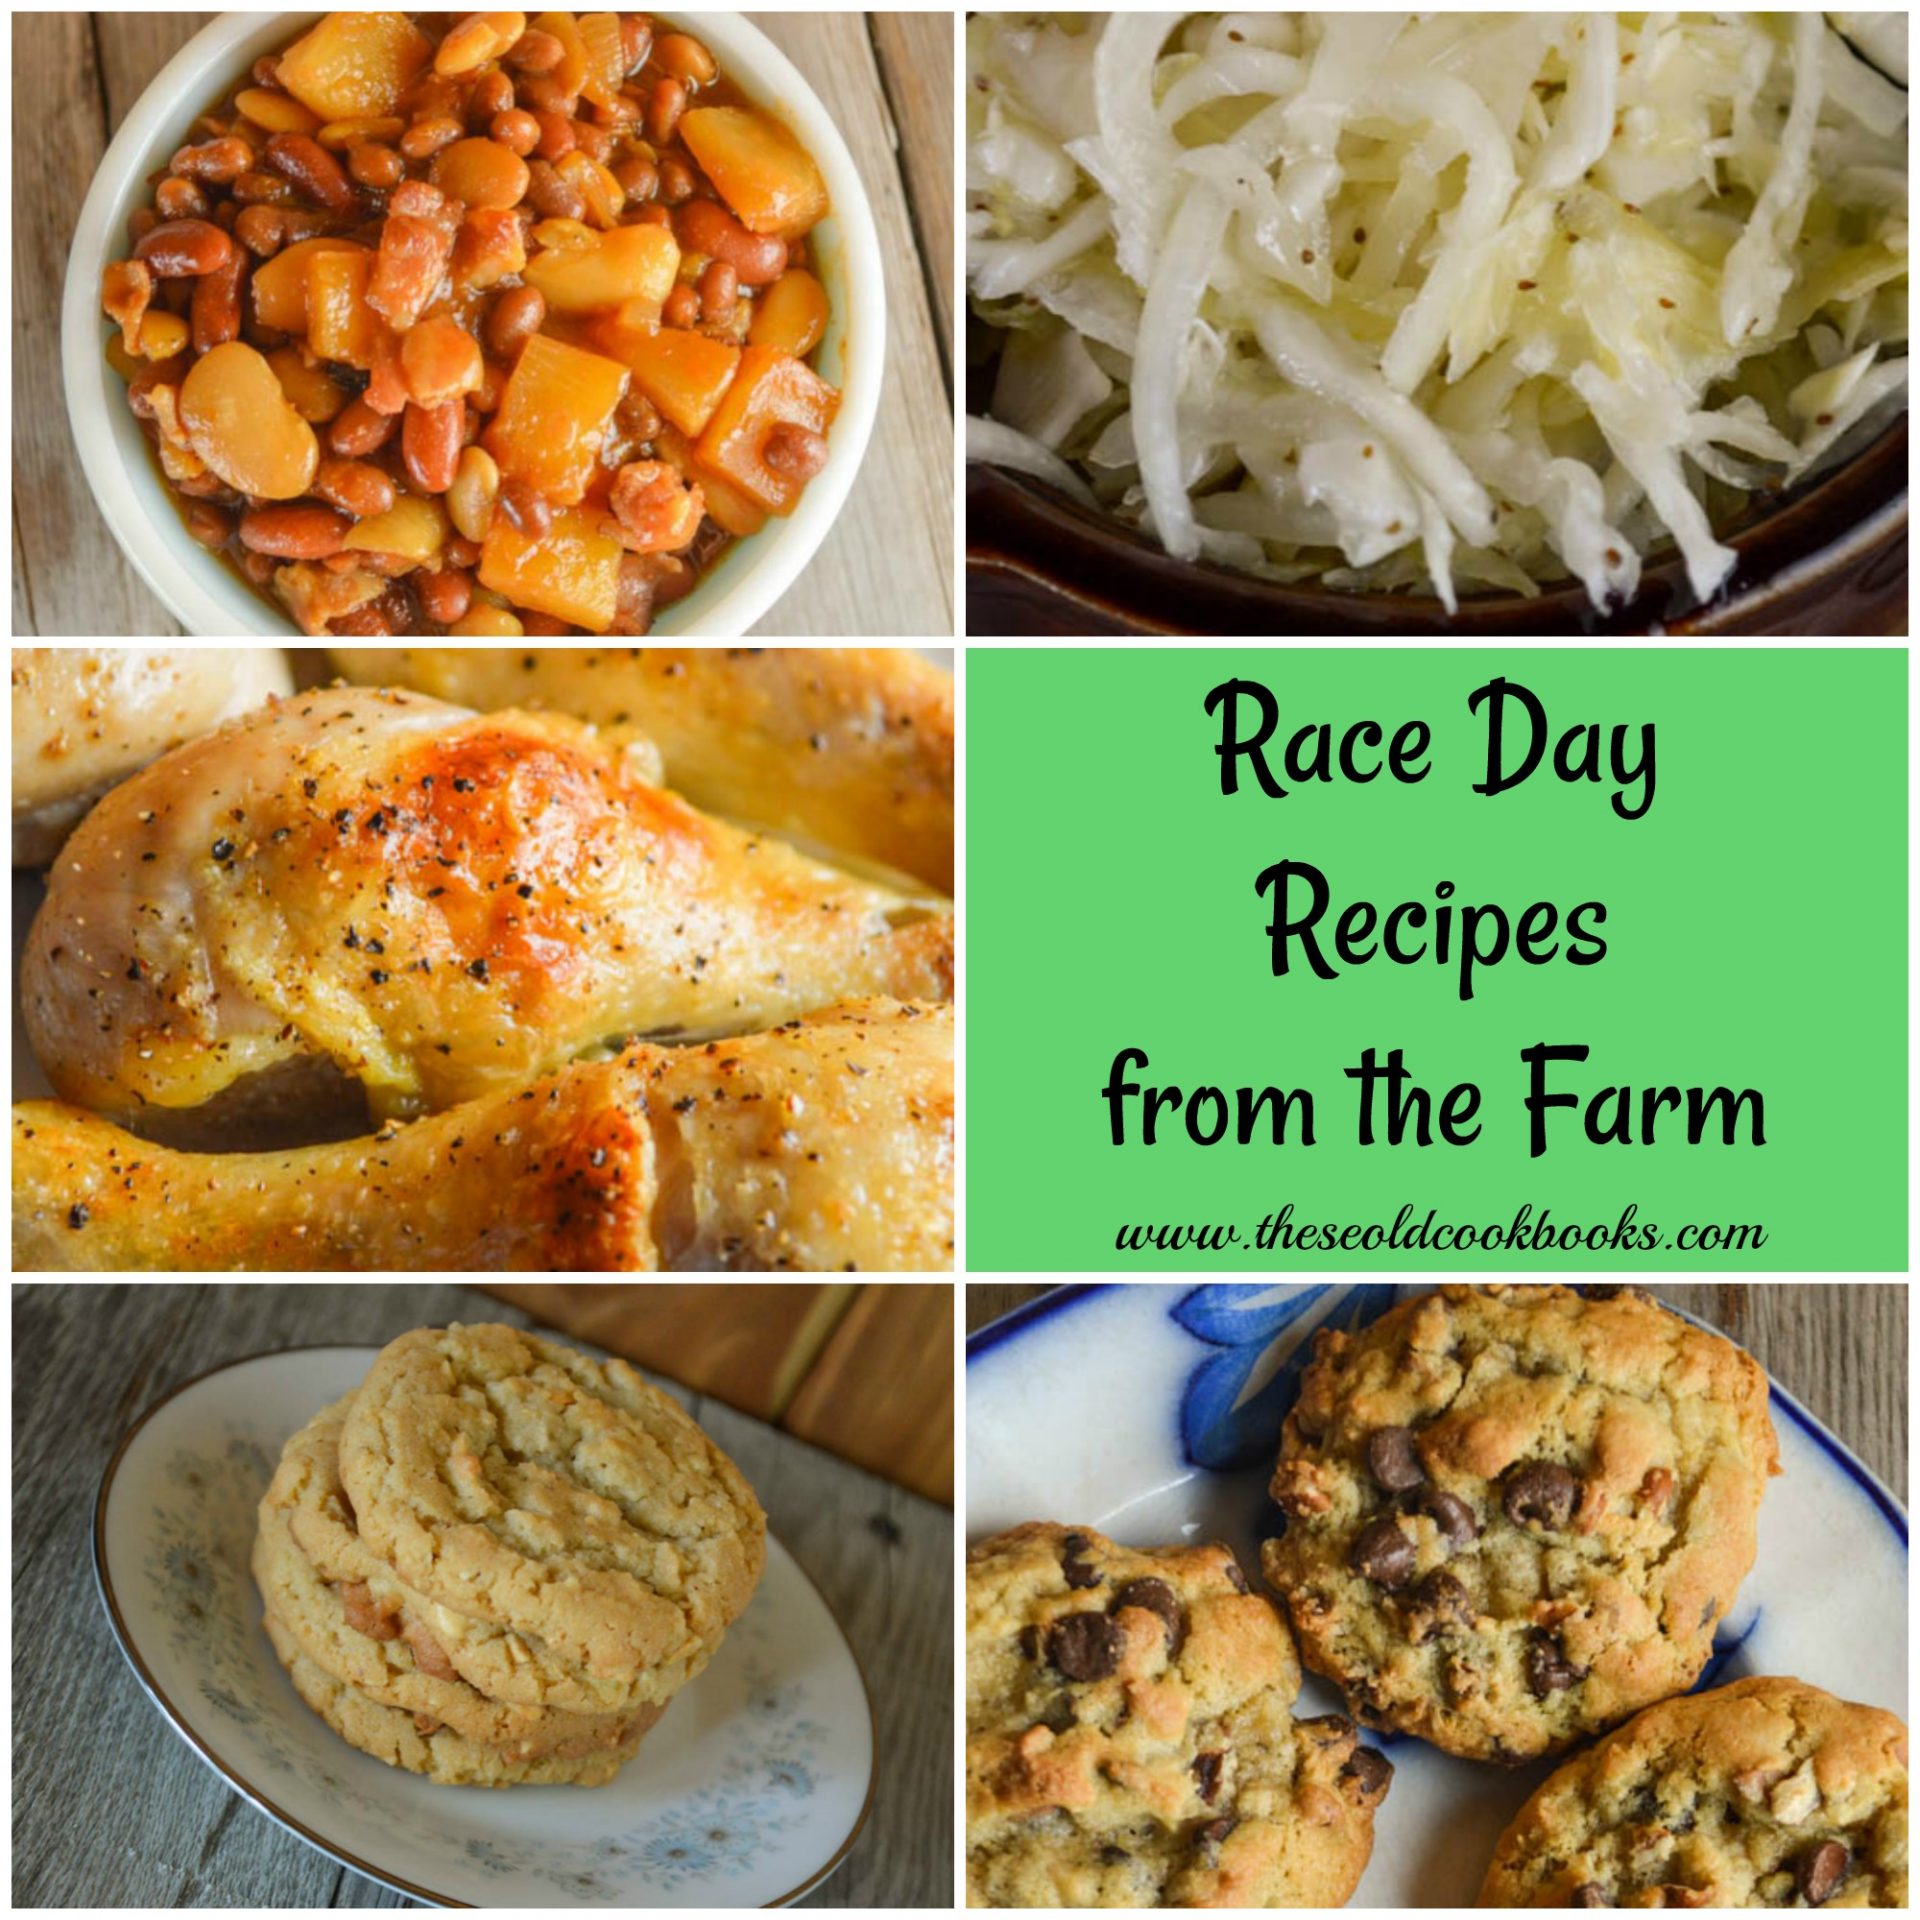 Race Day Recipes from the Farm